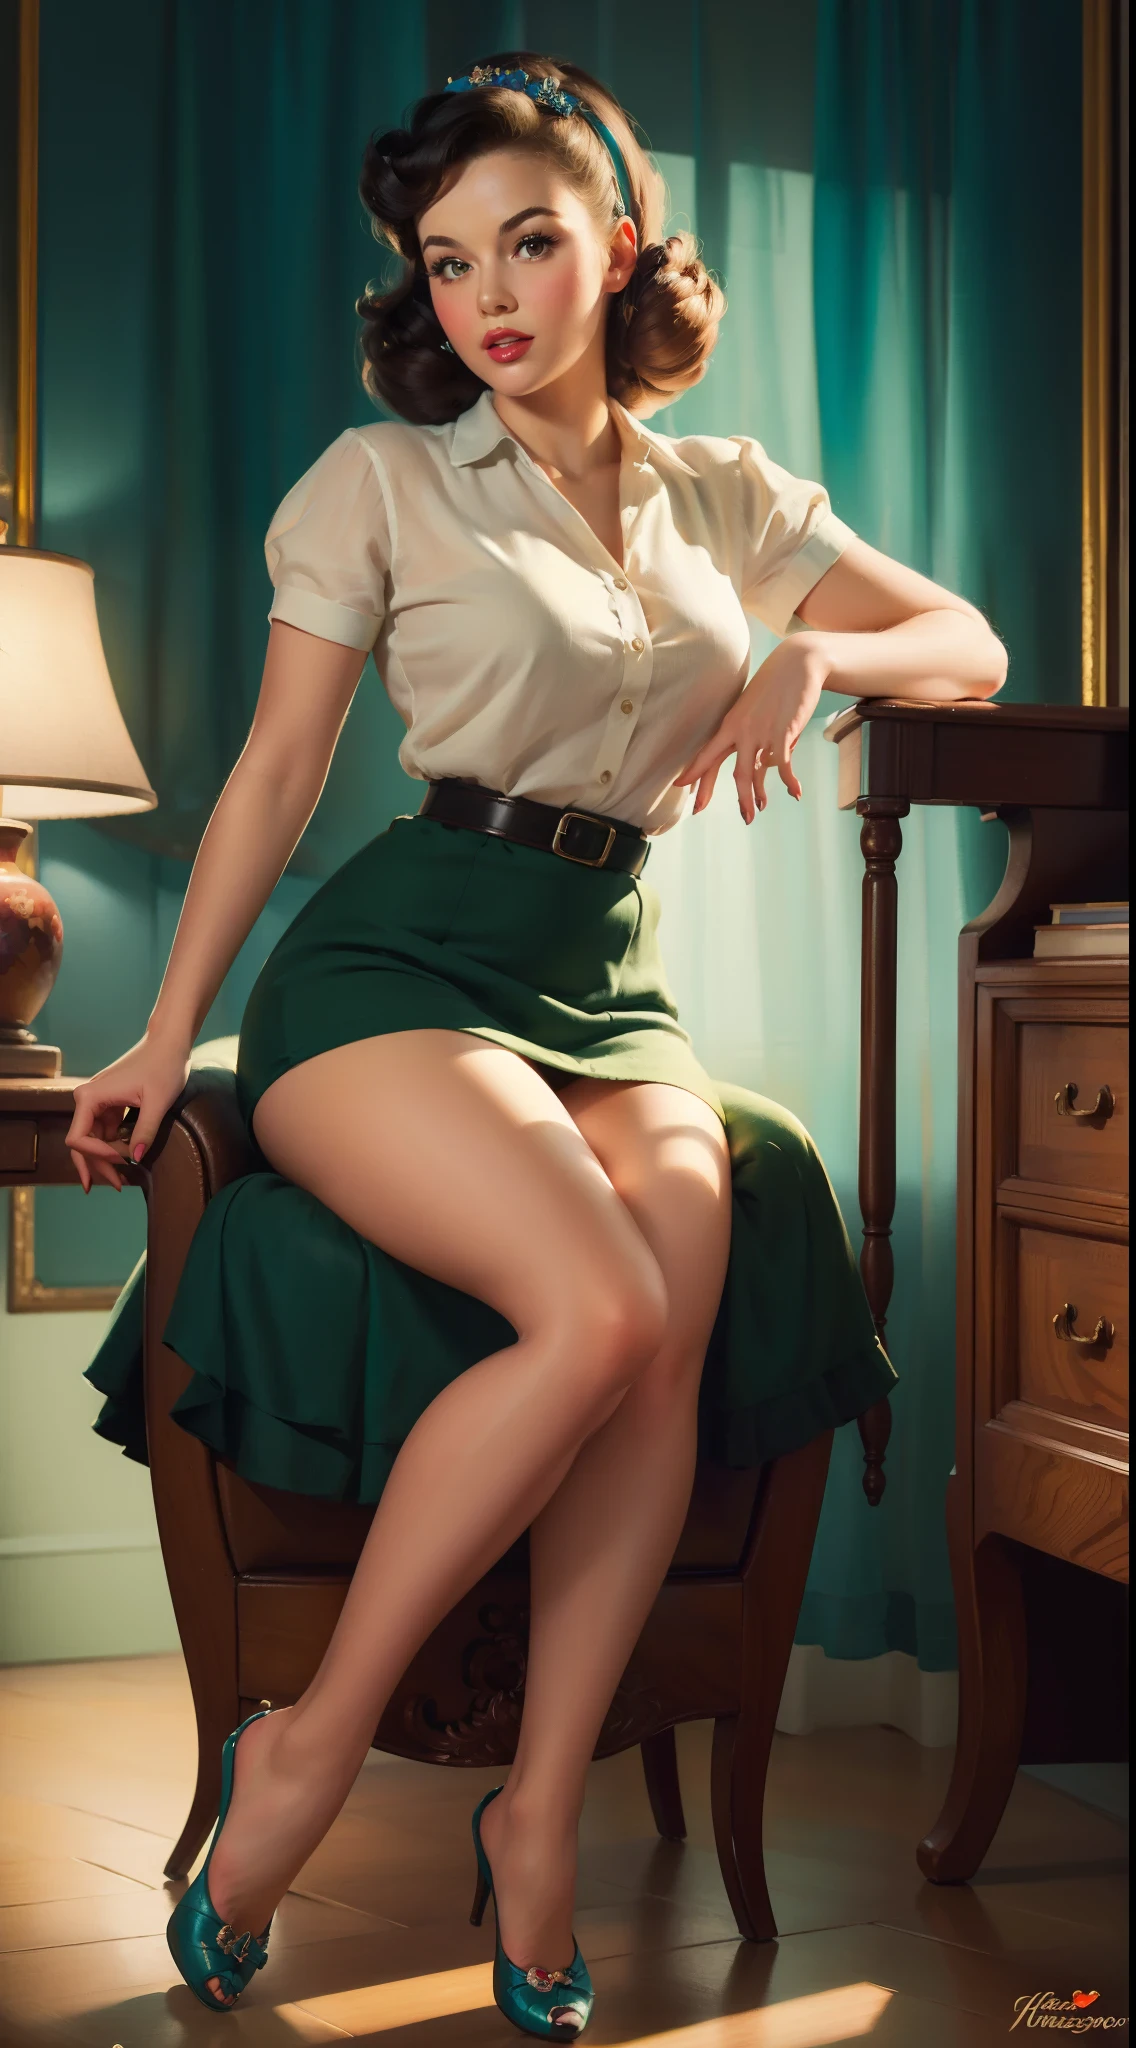 (masterpiece:1.4), (best quality:1.4), retro vintage pin-up style, extremely detailed, intricate, hyper-detailed, (detailed hand, fingers, legs),illustration, soft lighting,,20 years old girl sitting on the chair, vintage, retro pin up style,sexy, , surprised, mini tight skirt, flowing skirt, colorful , masterpieces art work, illustrated,caustics, full_body, digital_illustration